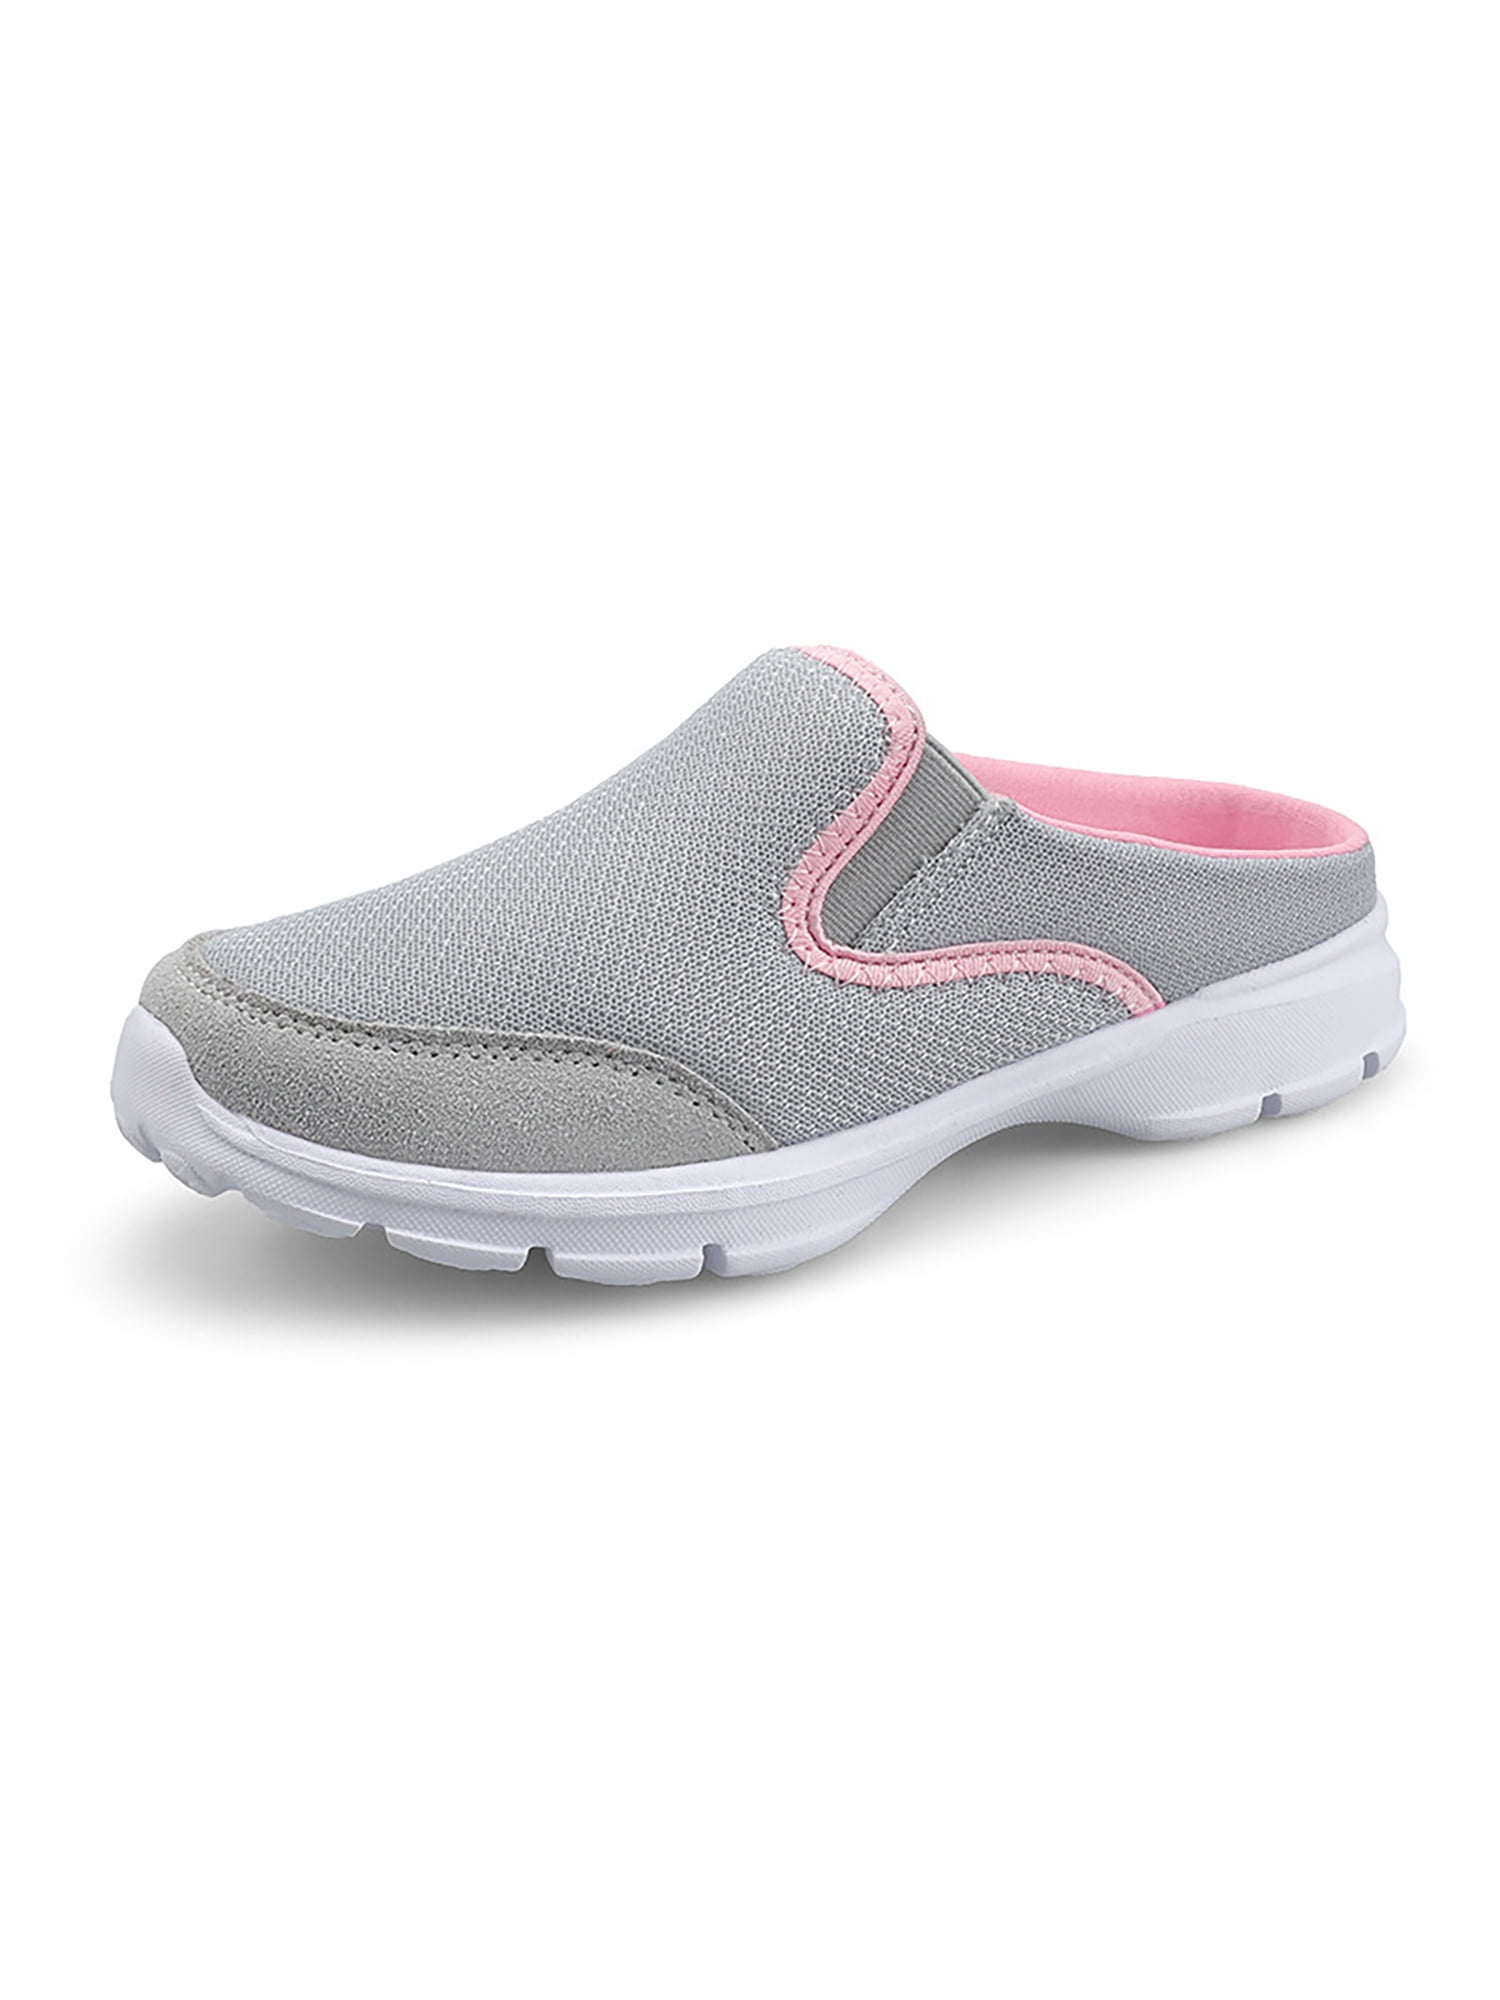 Gomelly Women's Backless Walking Sneakers Summer Slip-on Mule Shoes Closed  Toe Slippers 